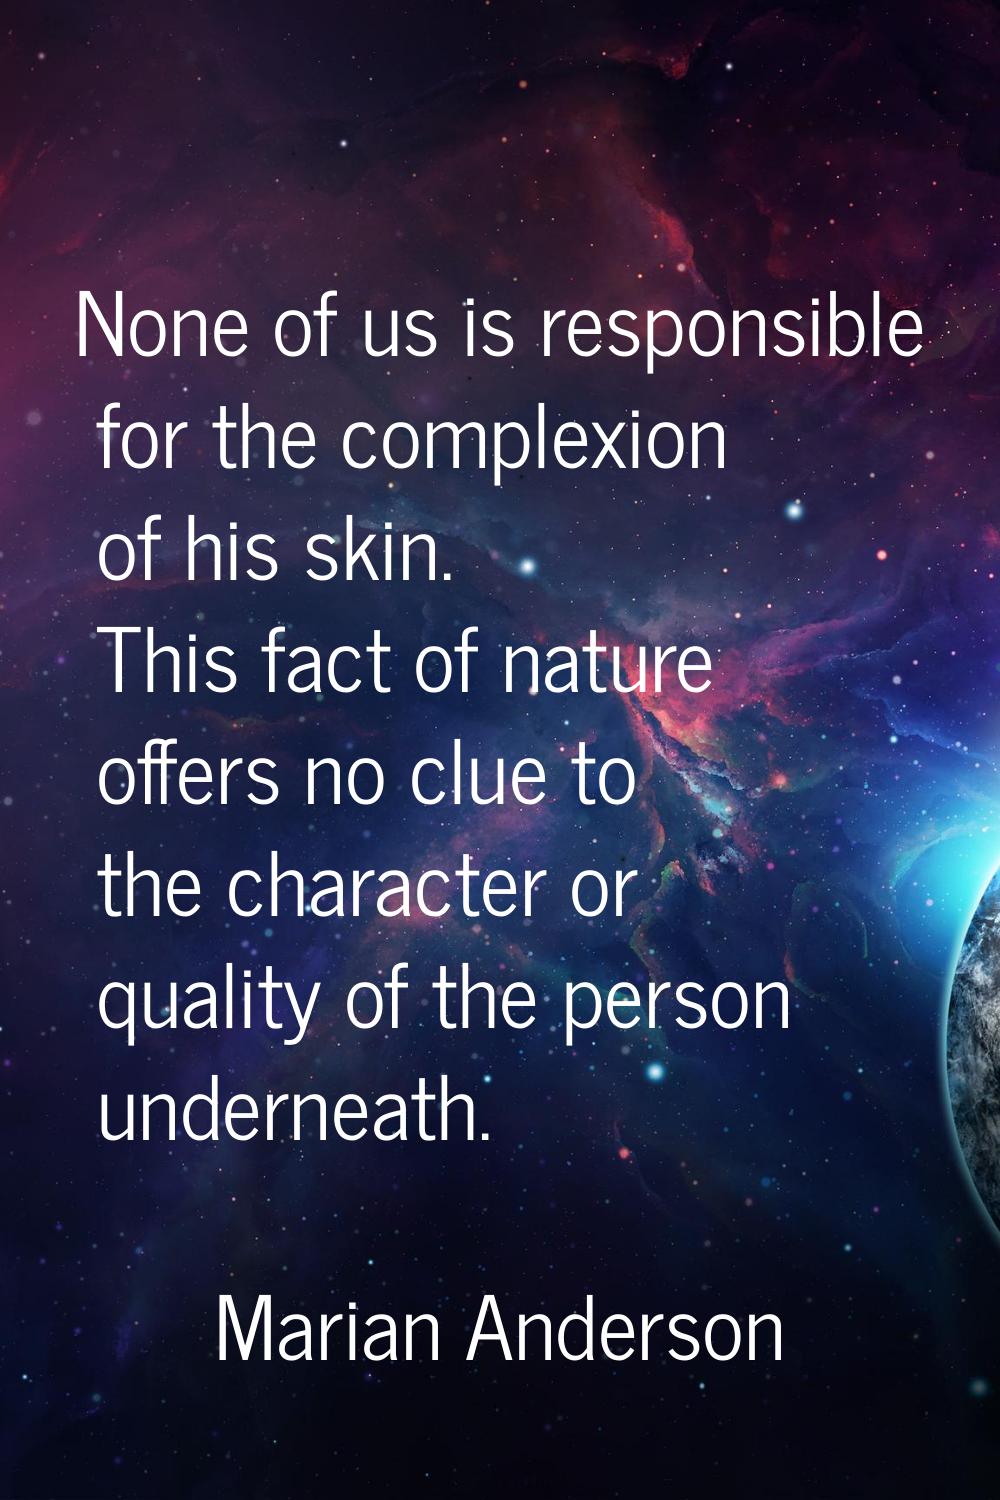 None of us is responsible for the complexion of his skin. This fact of nature offers no clue to the